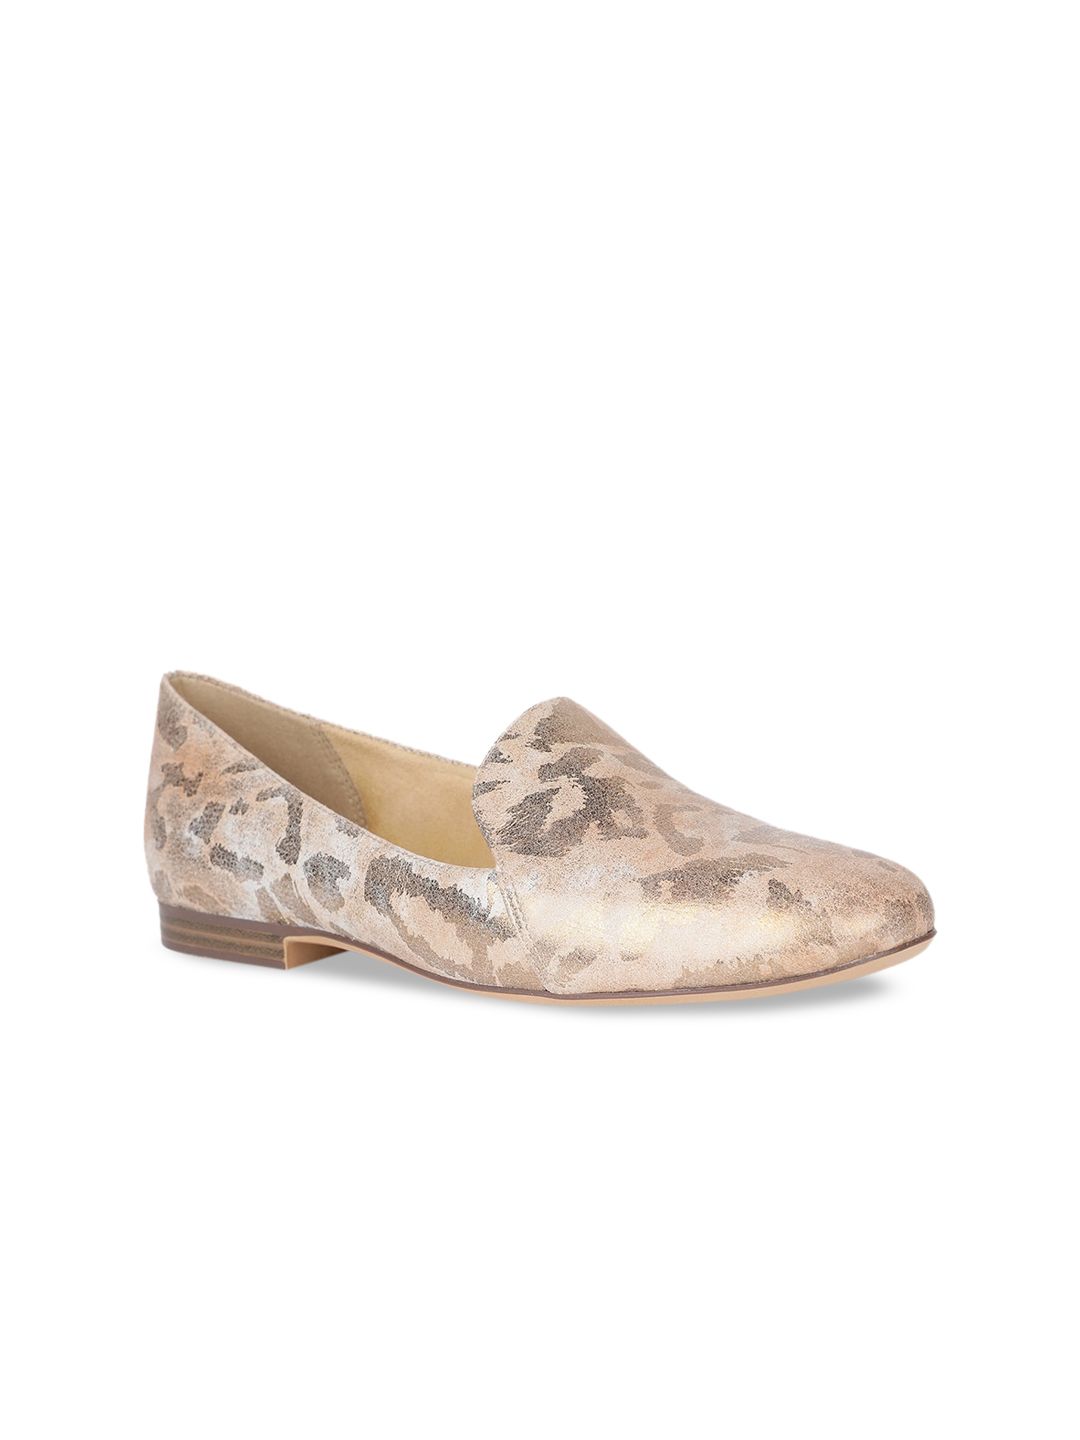 Naturalizer Women Beige Printed Leather Loafers Price in India